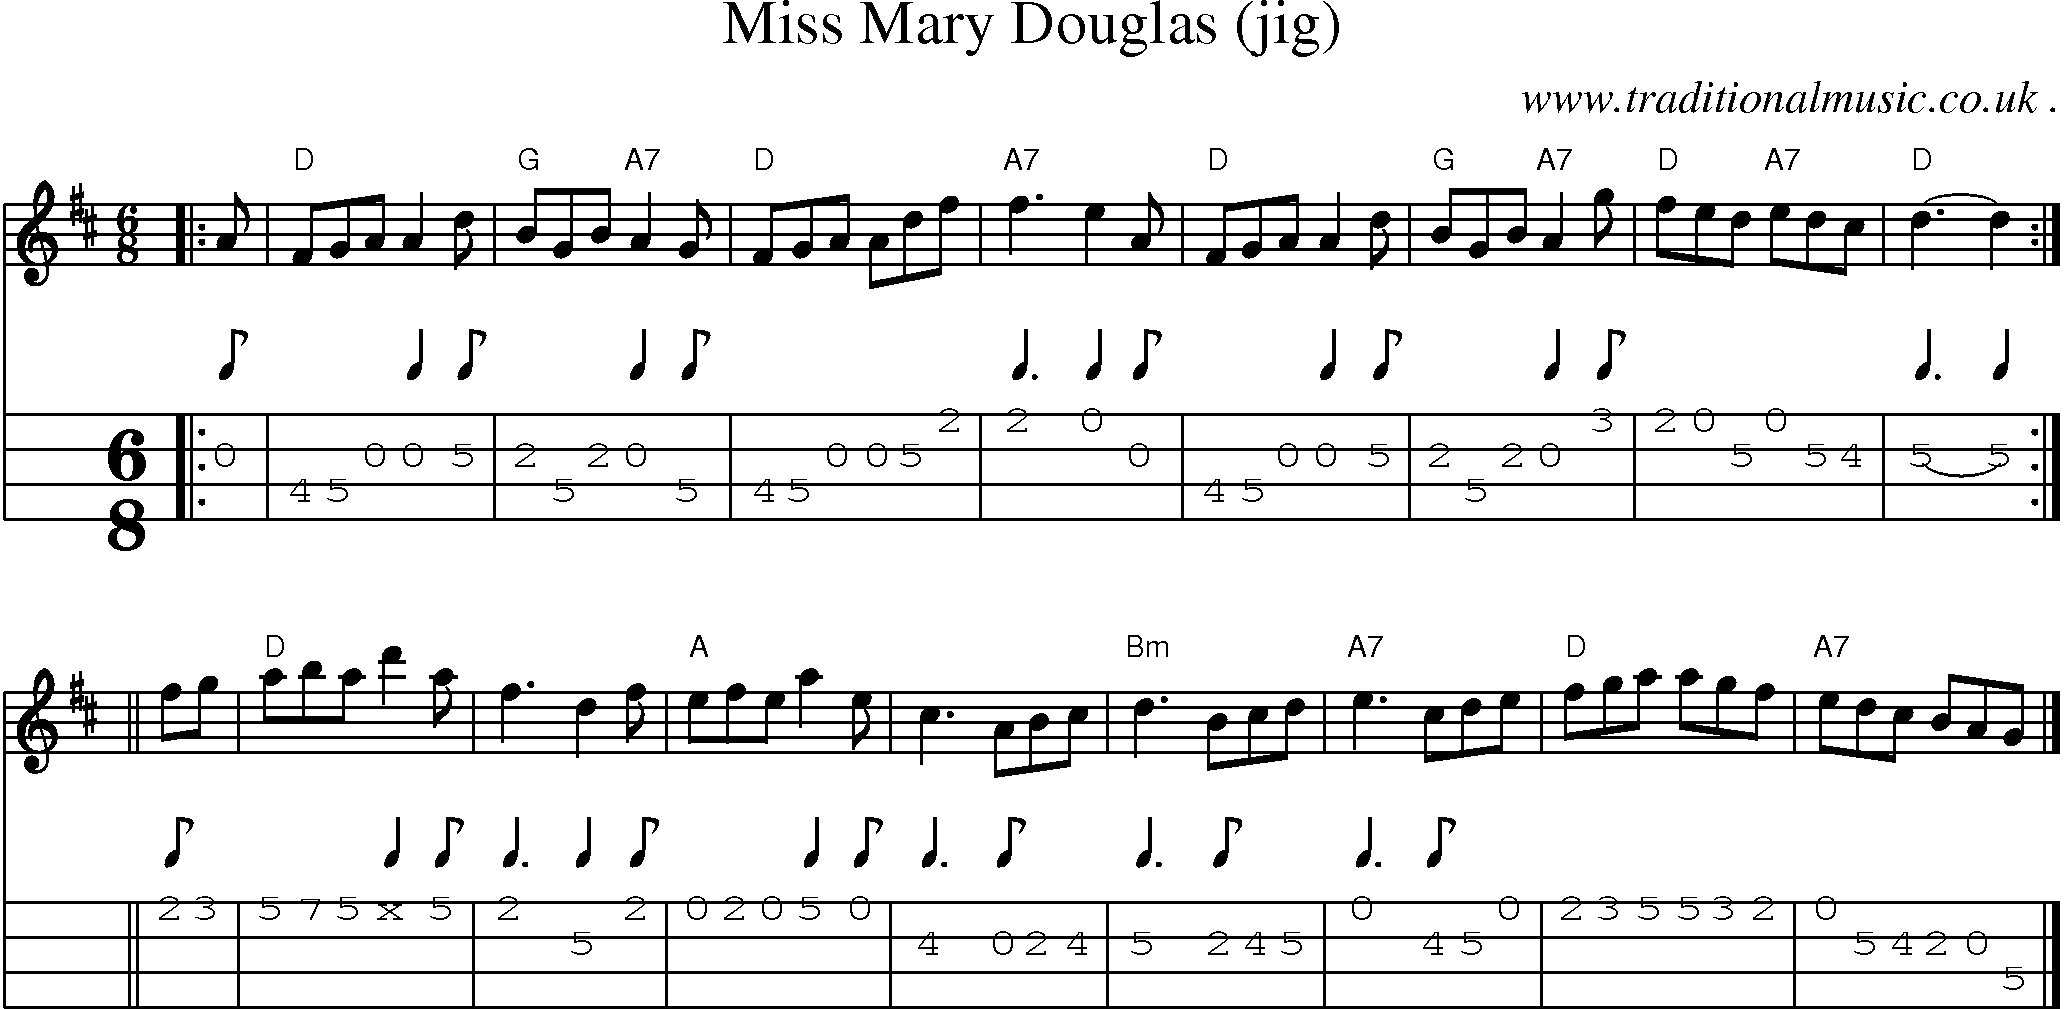 Sheet-music  score, Chords and Mandolin Tabs for Miss Mary Douglas Jig